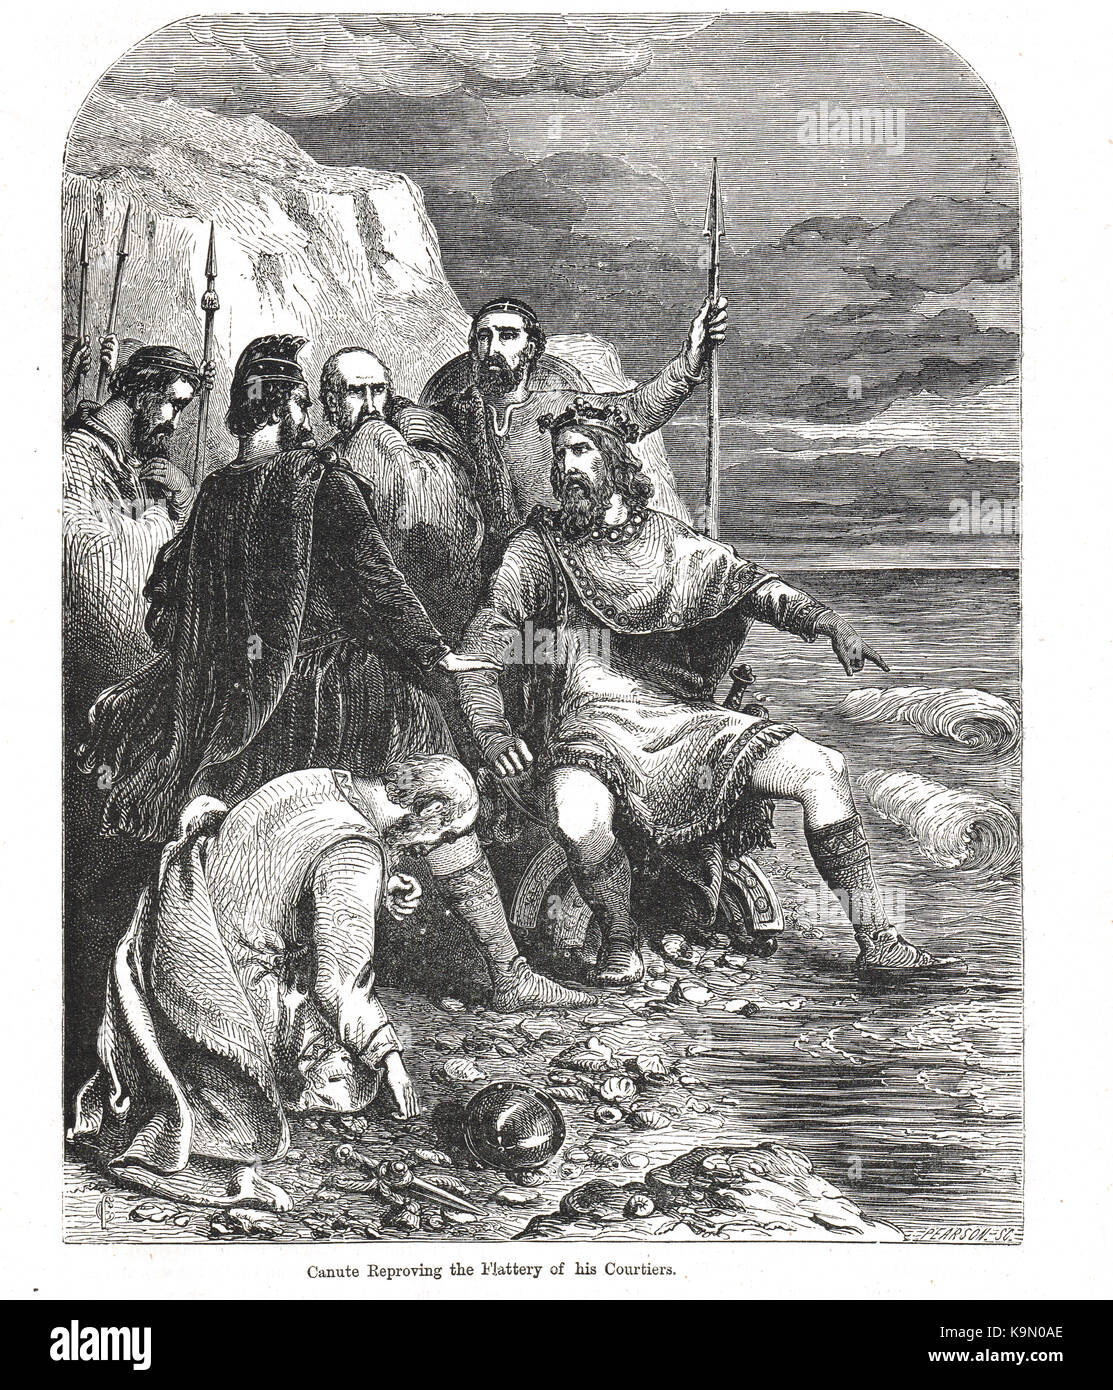 King Canute and the waves, 11th century, Cnut the Great reproving the flattery of his courtiers Stock Photo